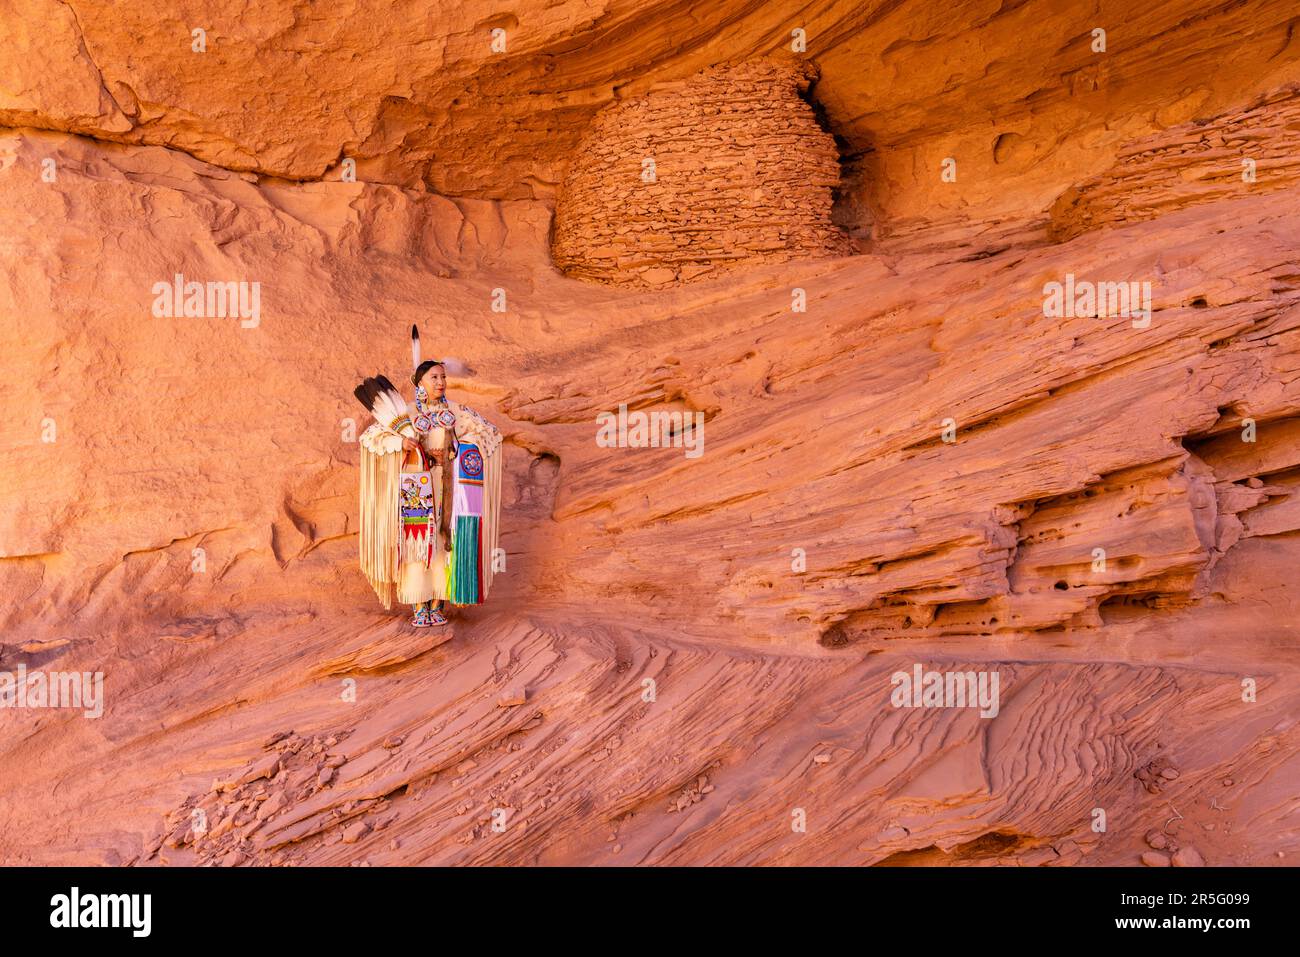 American Indian Navajo woman at Honeymoon Arch in Mystery Valley of the Monument Valley Navajo Tribal Park, Arizona, United States Stock Photo